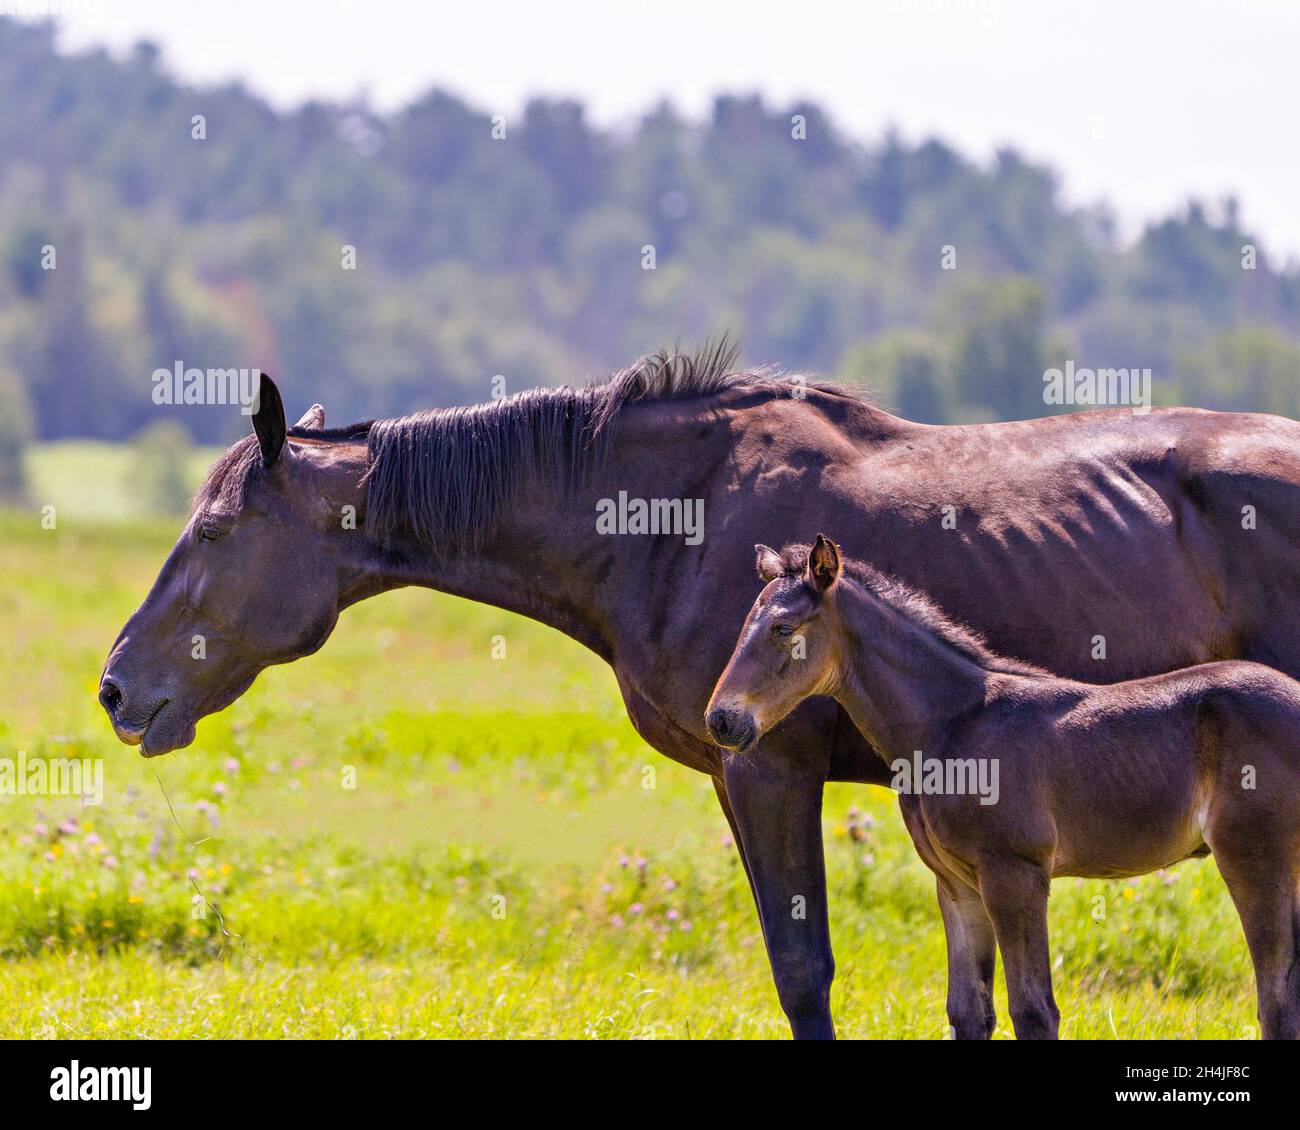 Mother horse and young foal close-up side profile in the field eating grass and wildflowers with a blur tree background. Stock Photo